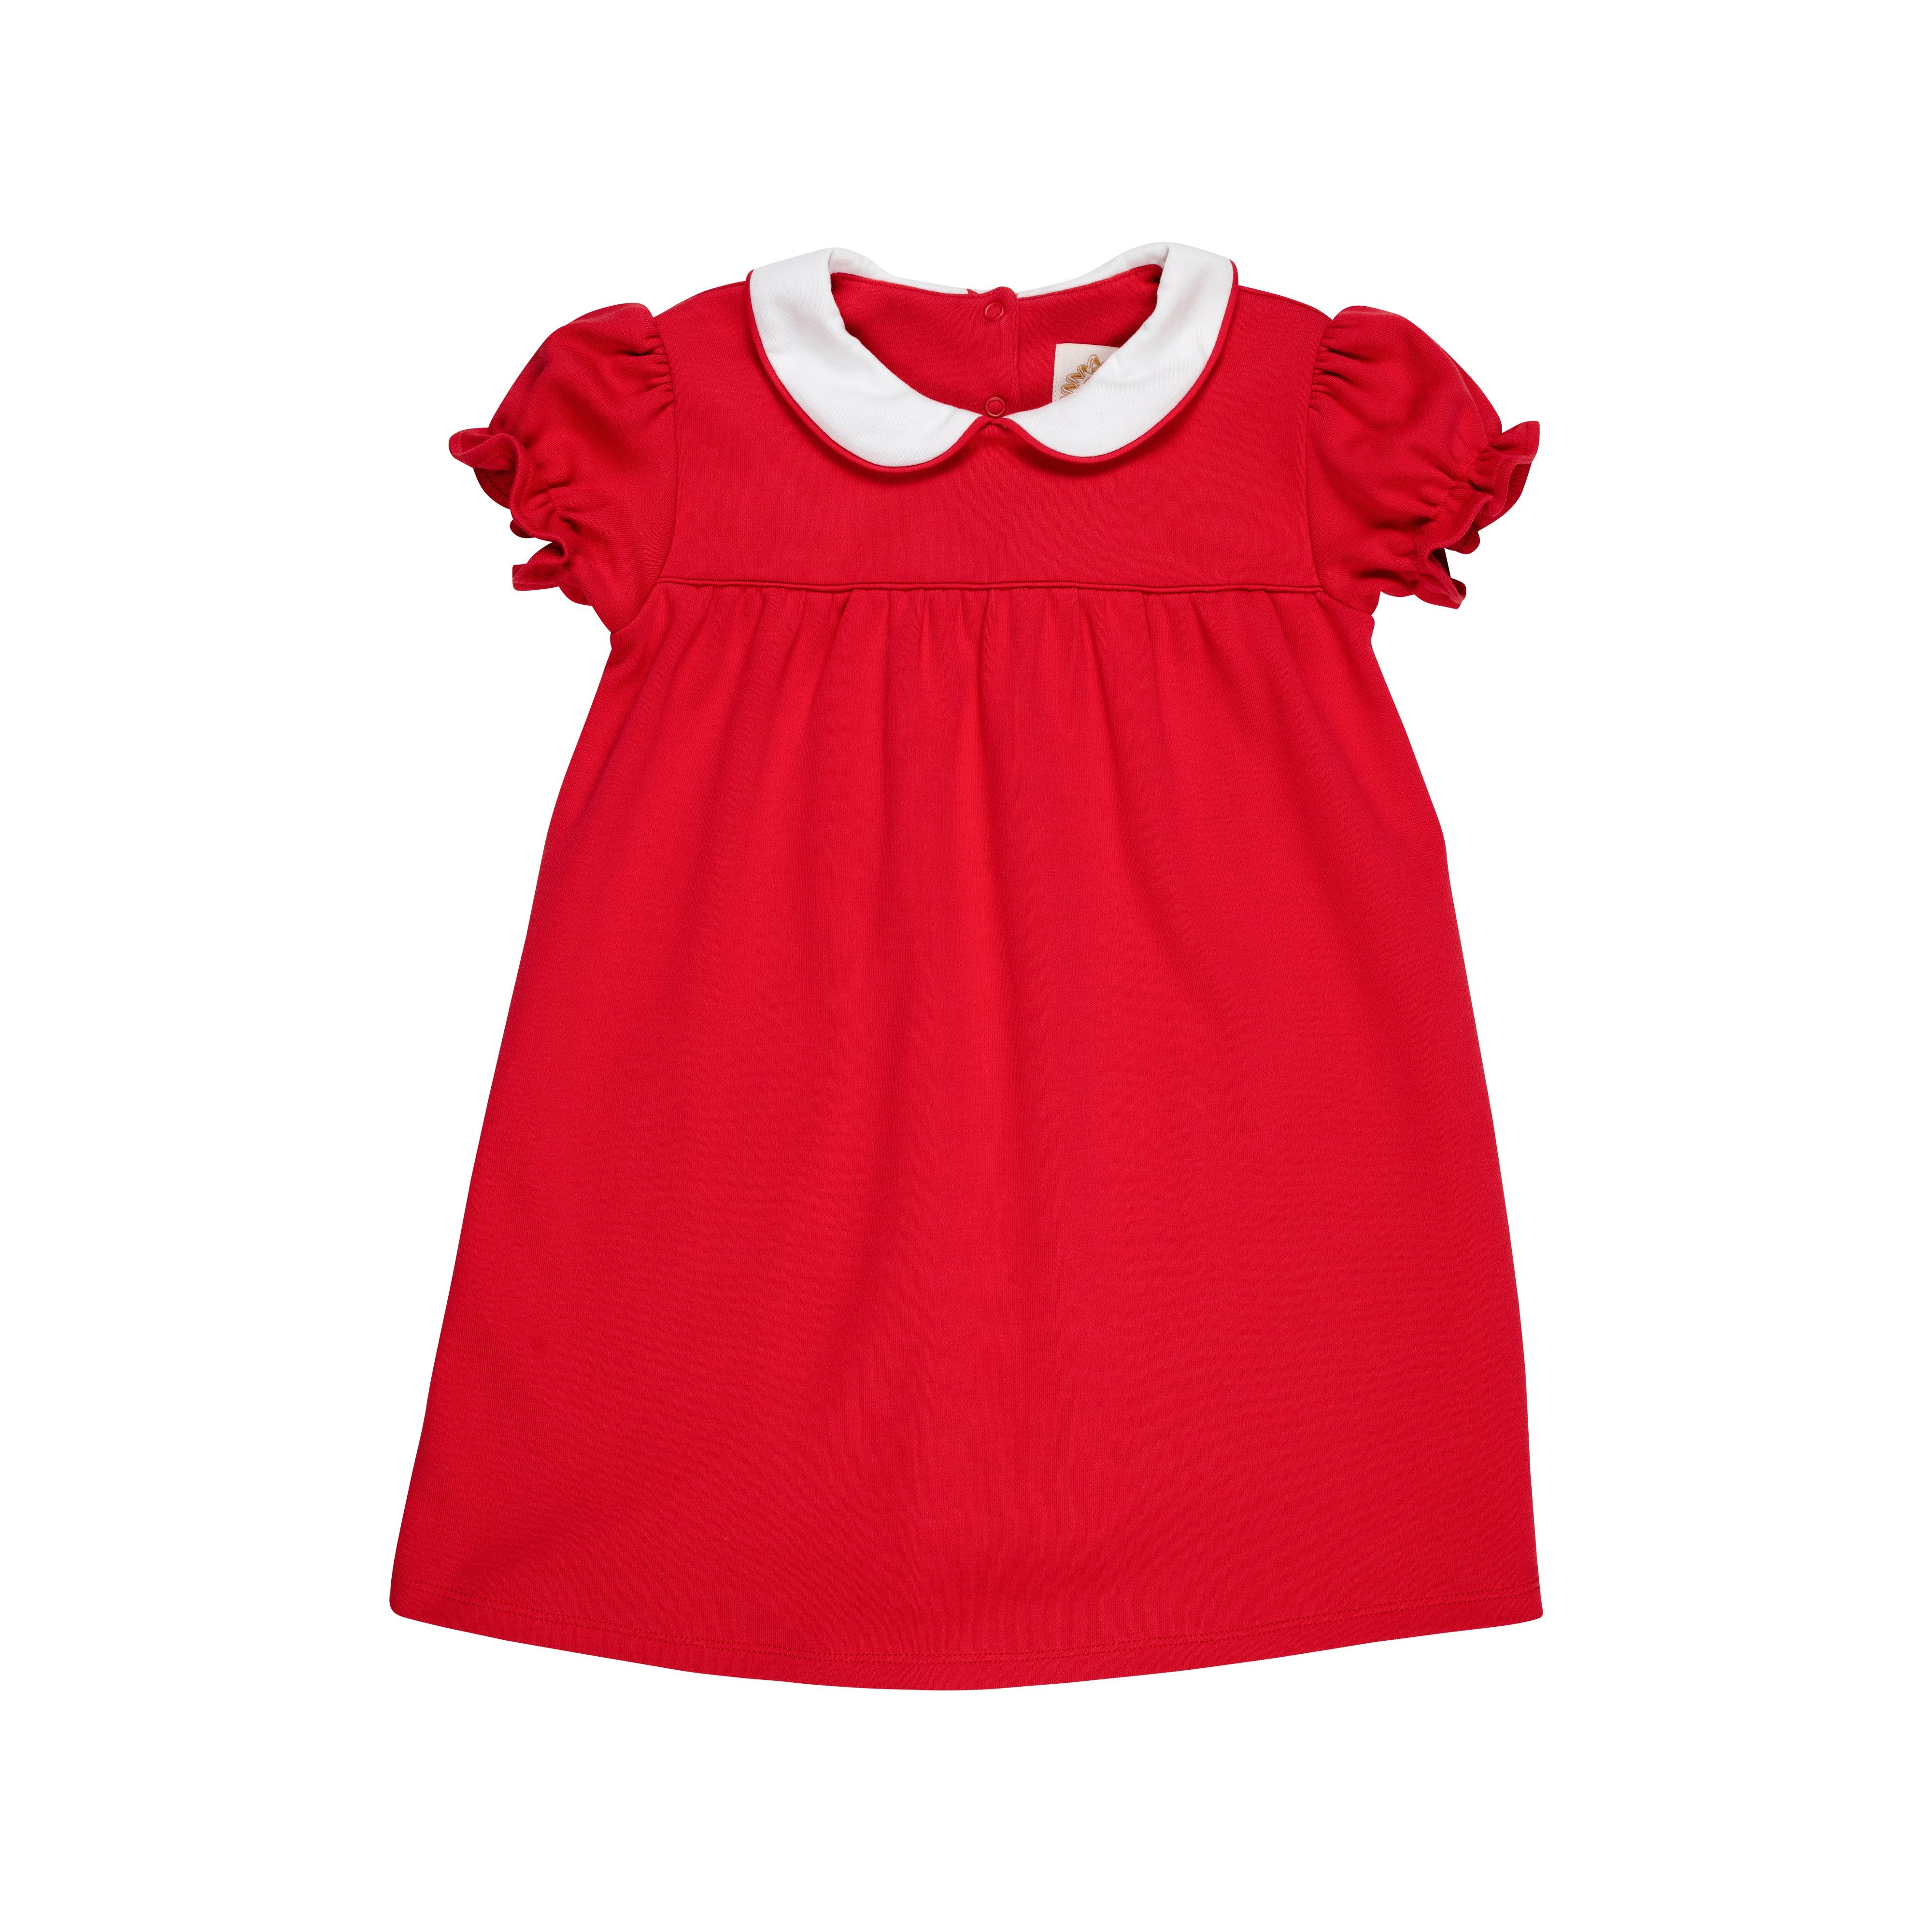 Holly Day Dress - Richmond Red with Worth Avenue White | The Beaufort Bonnet Company